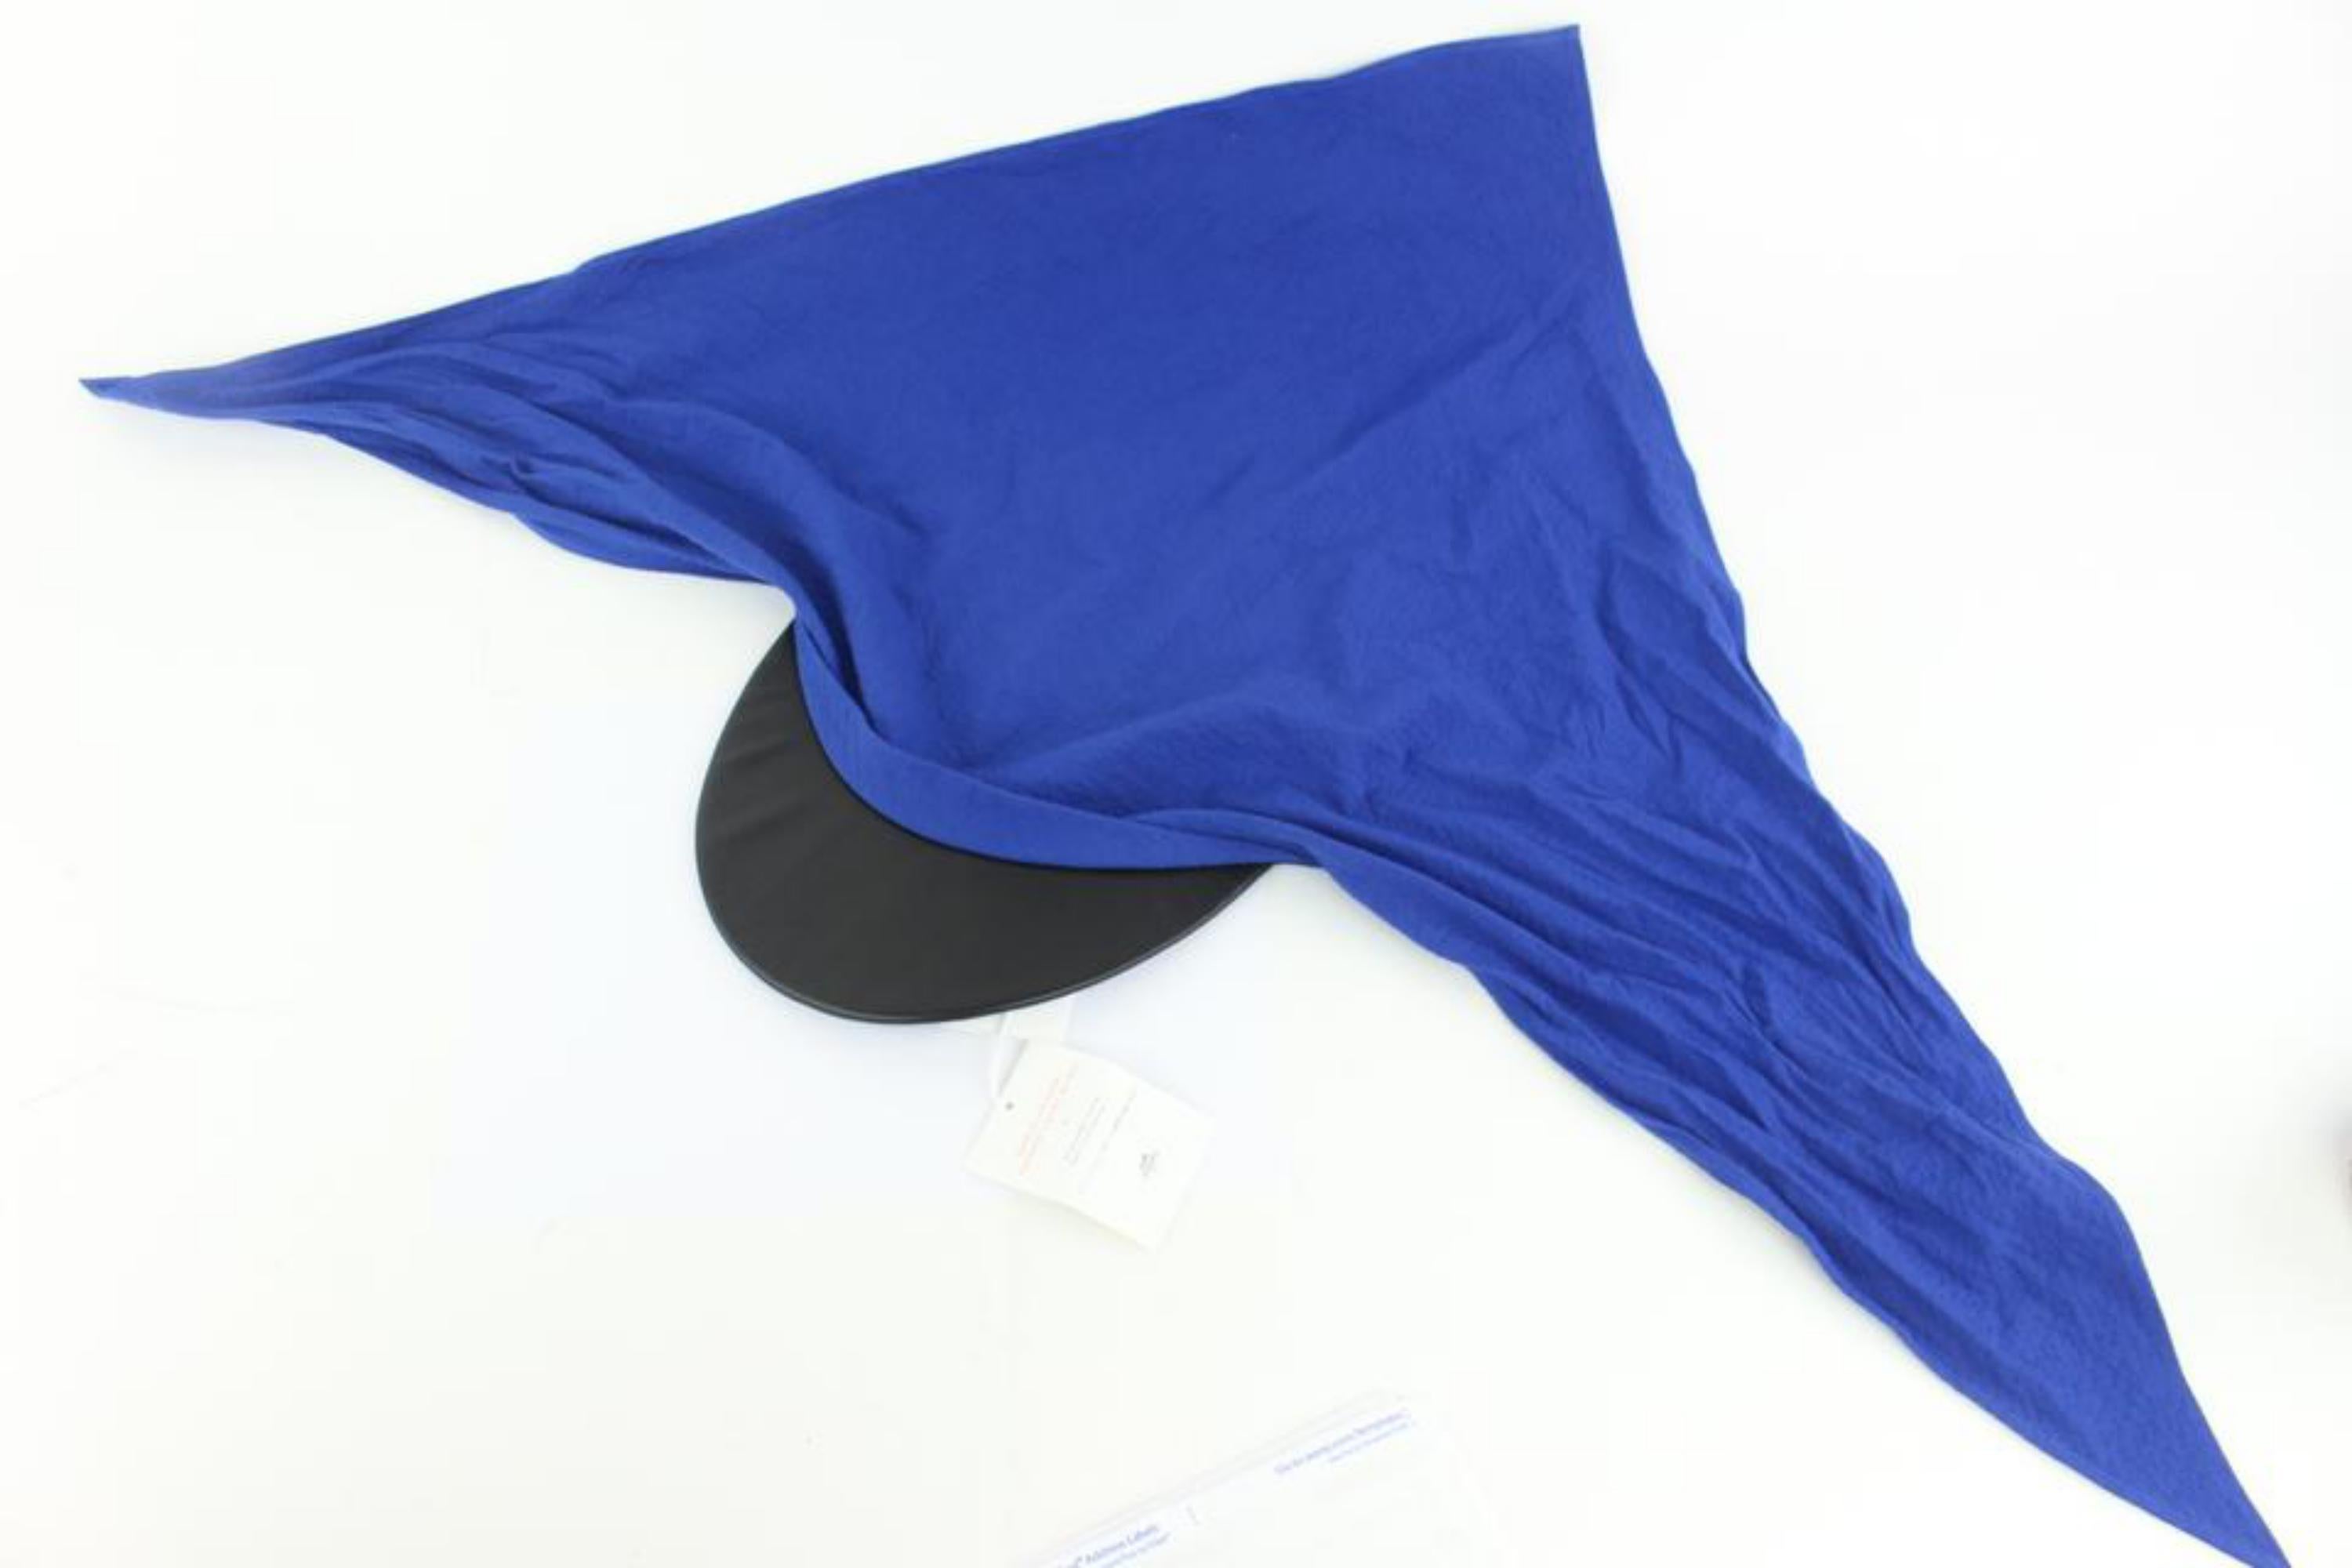 Hermès Blue Gaby Seersucker Pointu Solaire Wrap Cap 33hz1009 Hat In New Condition For Sale In Forest Hills, NY